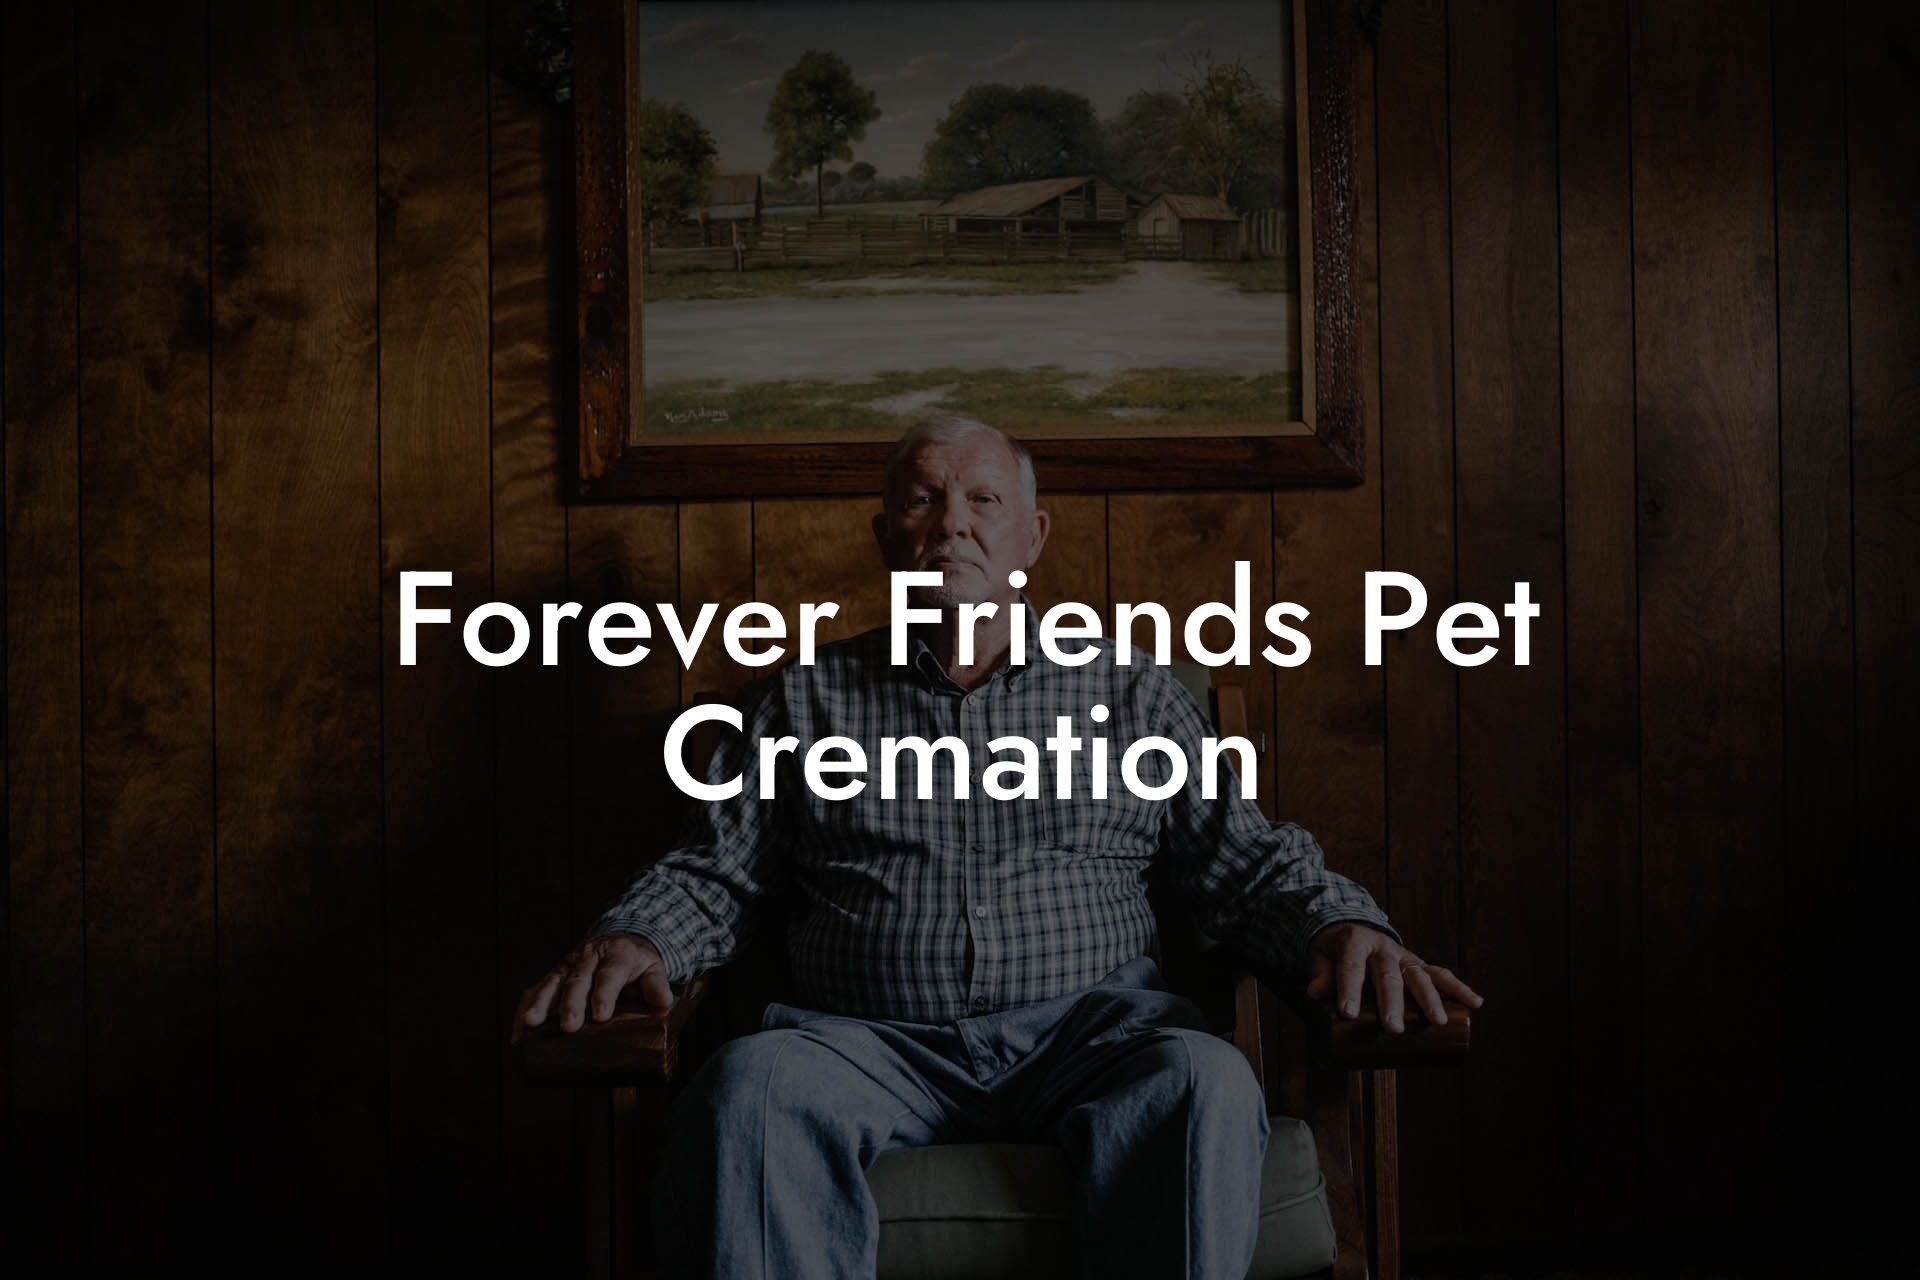 Forever Friends Pet Cremation